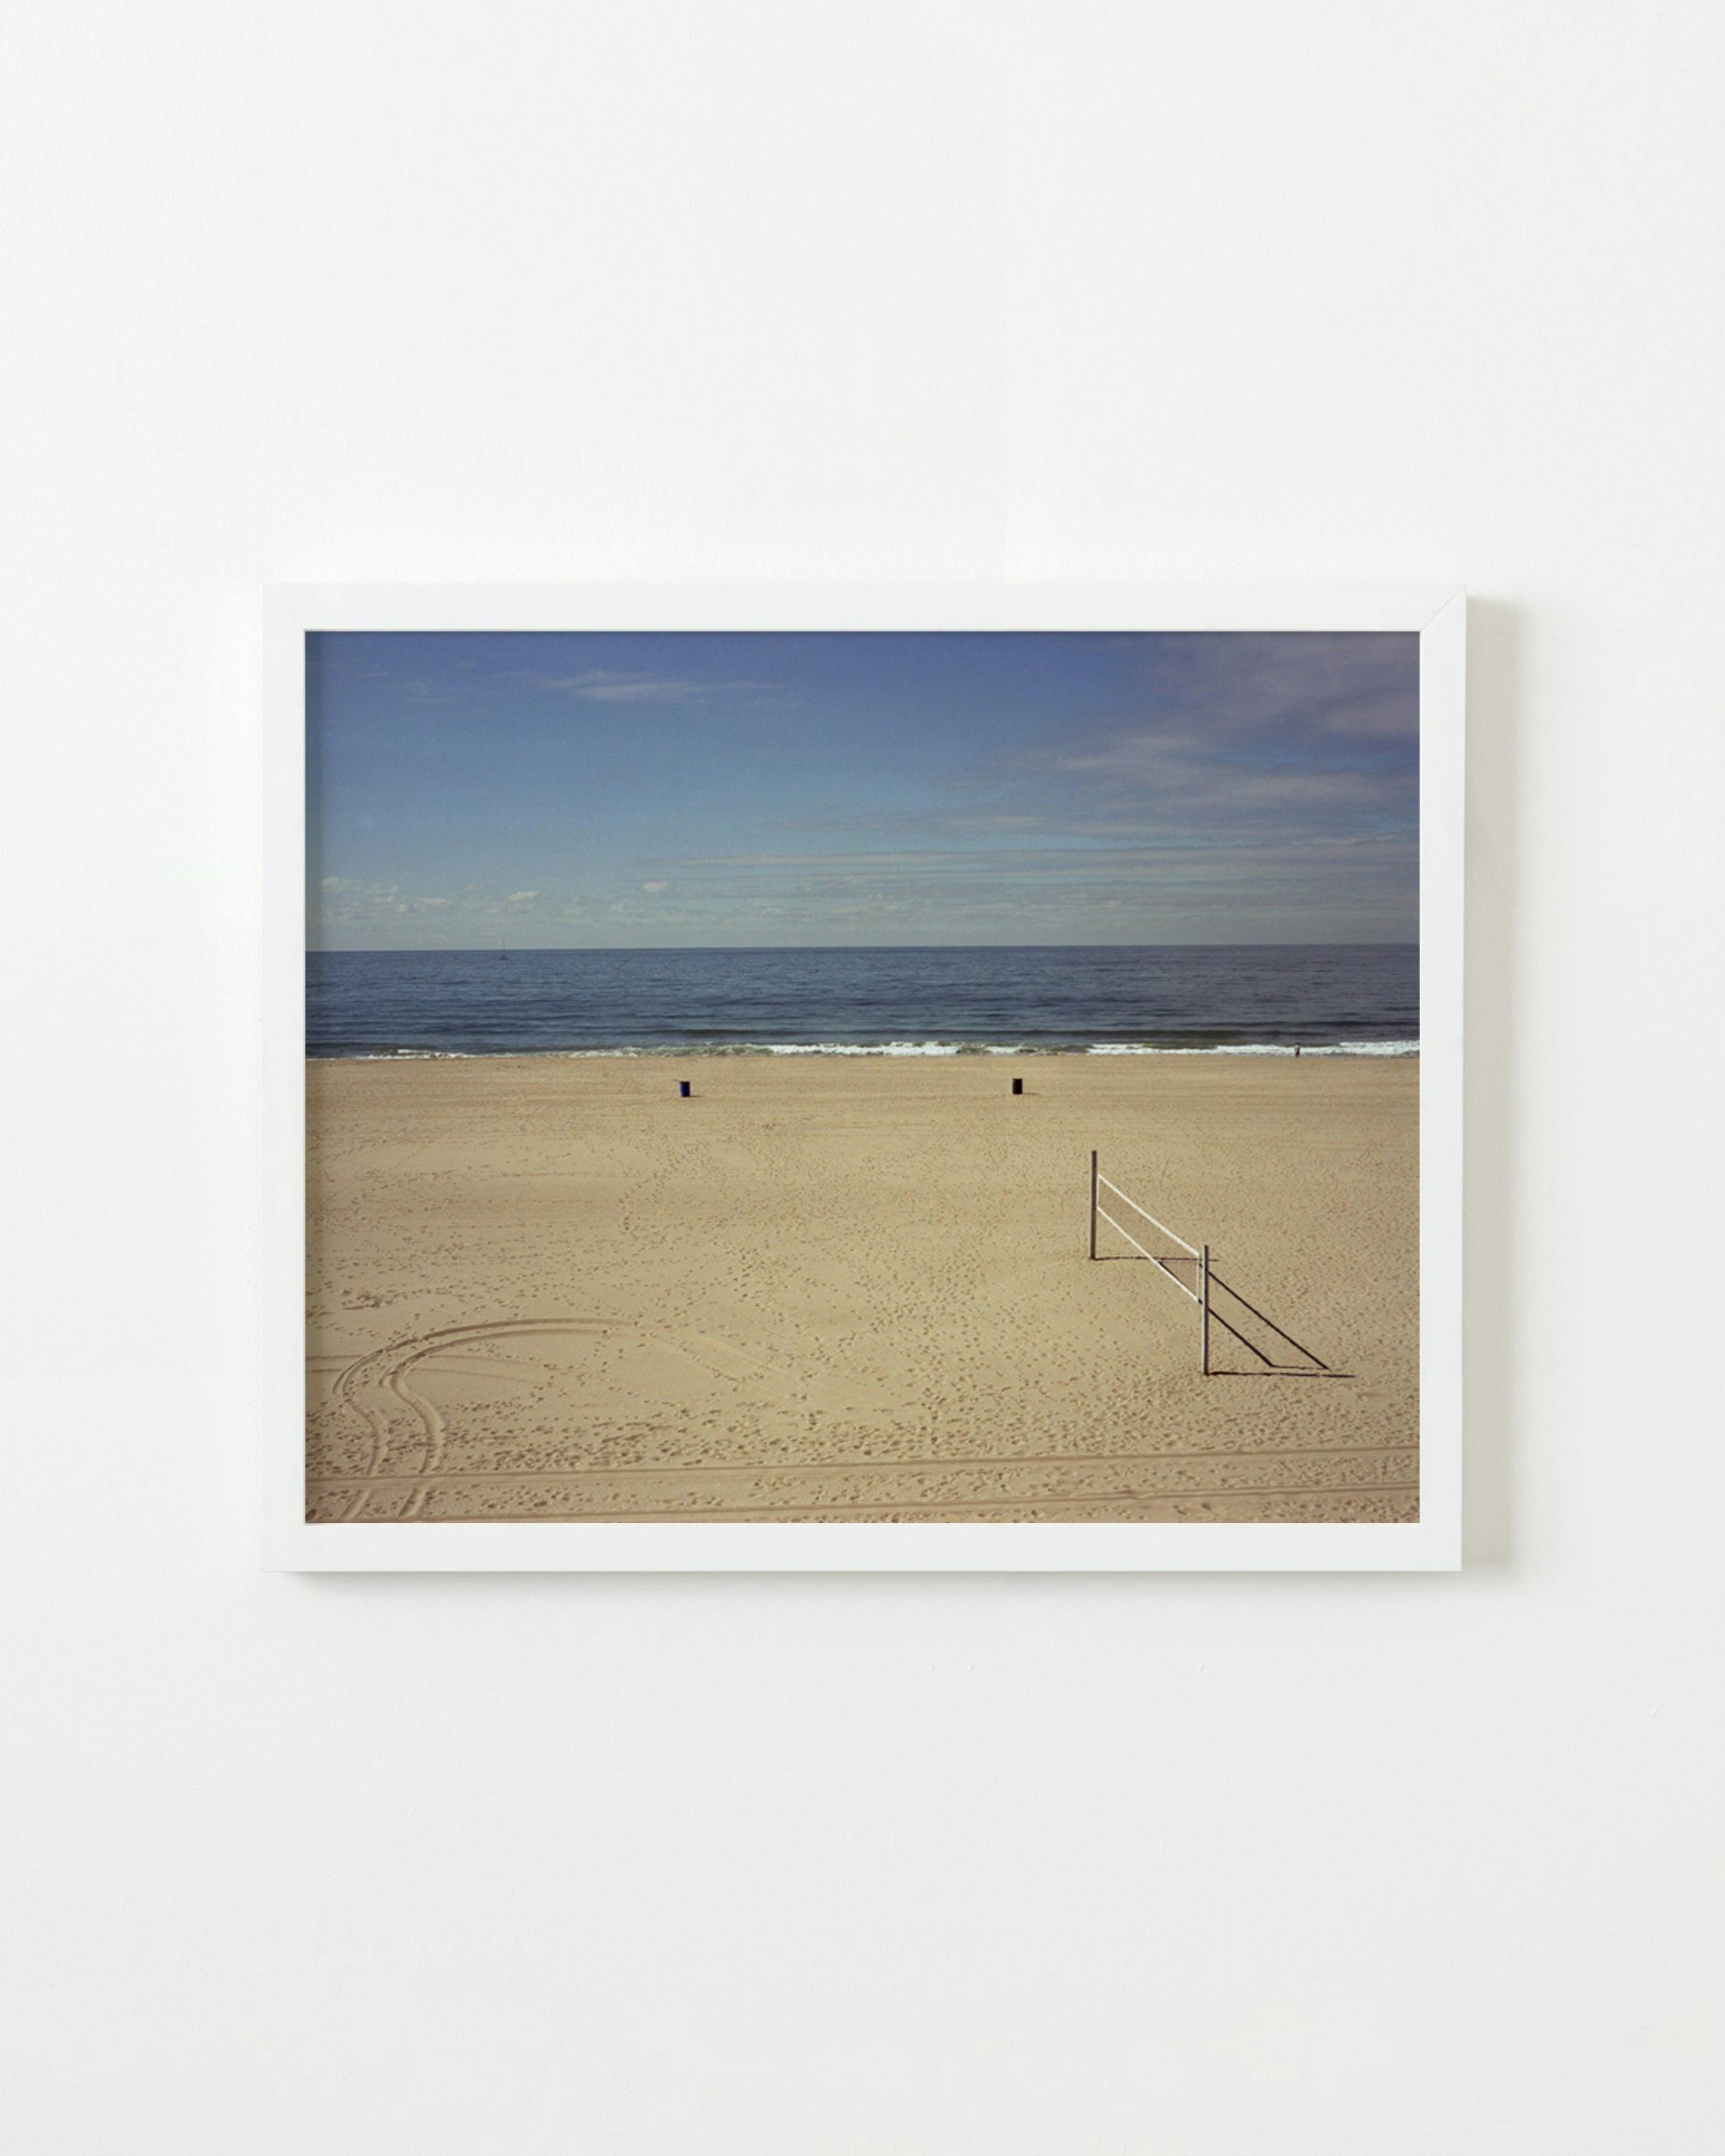 Photography by Nick Meyer titled "The Beach, Los Angeles".